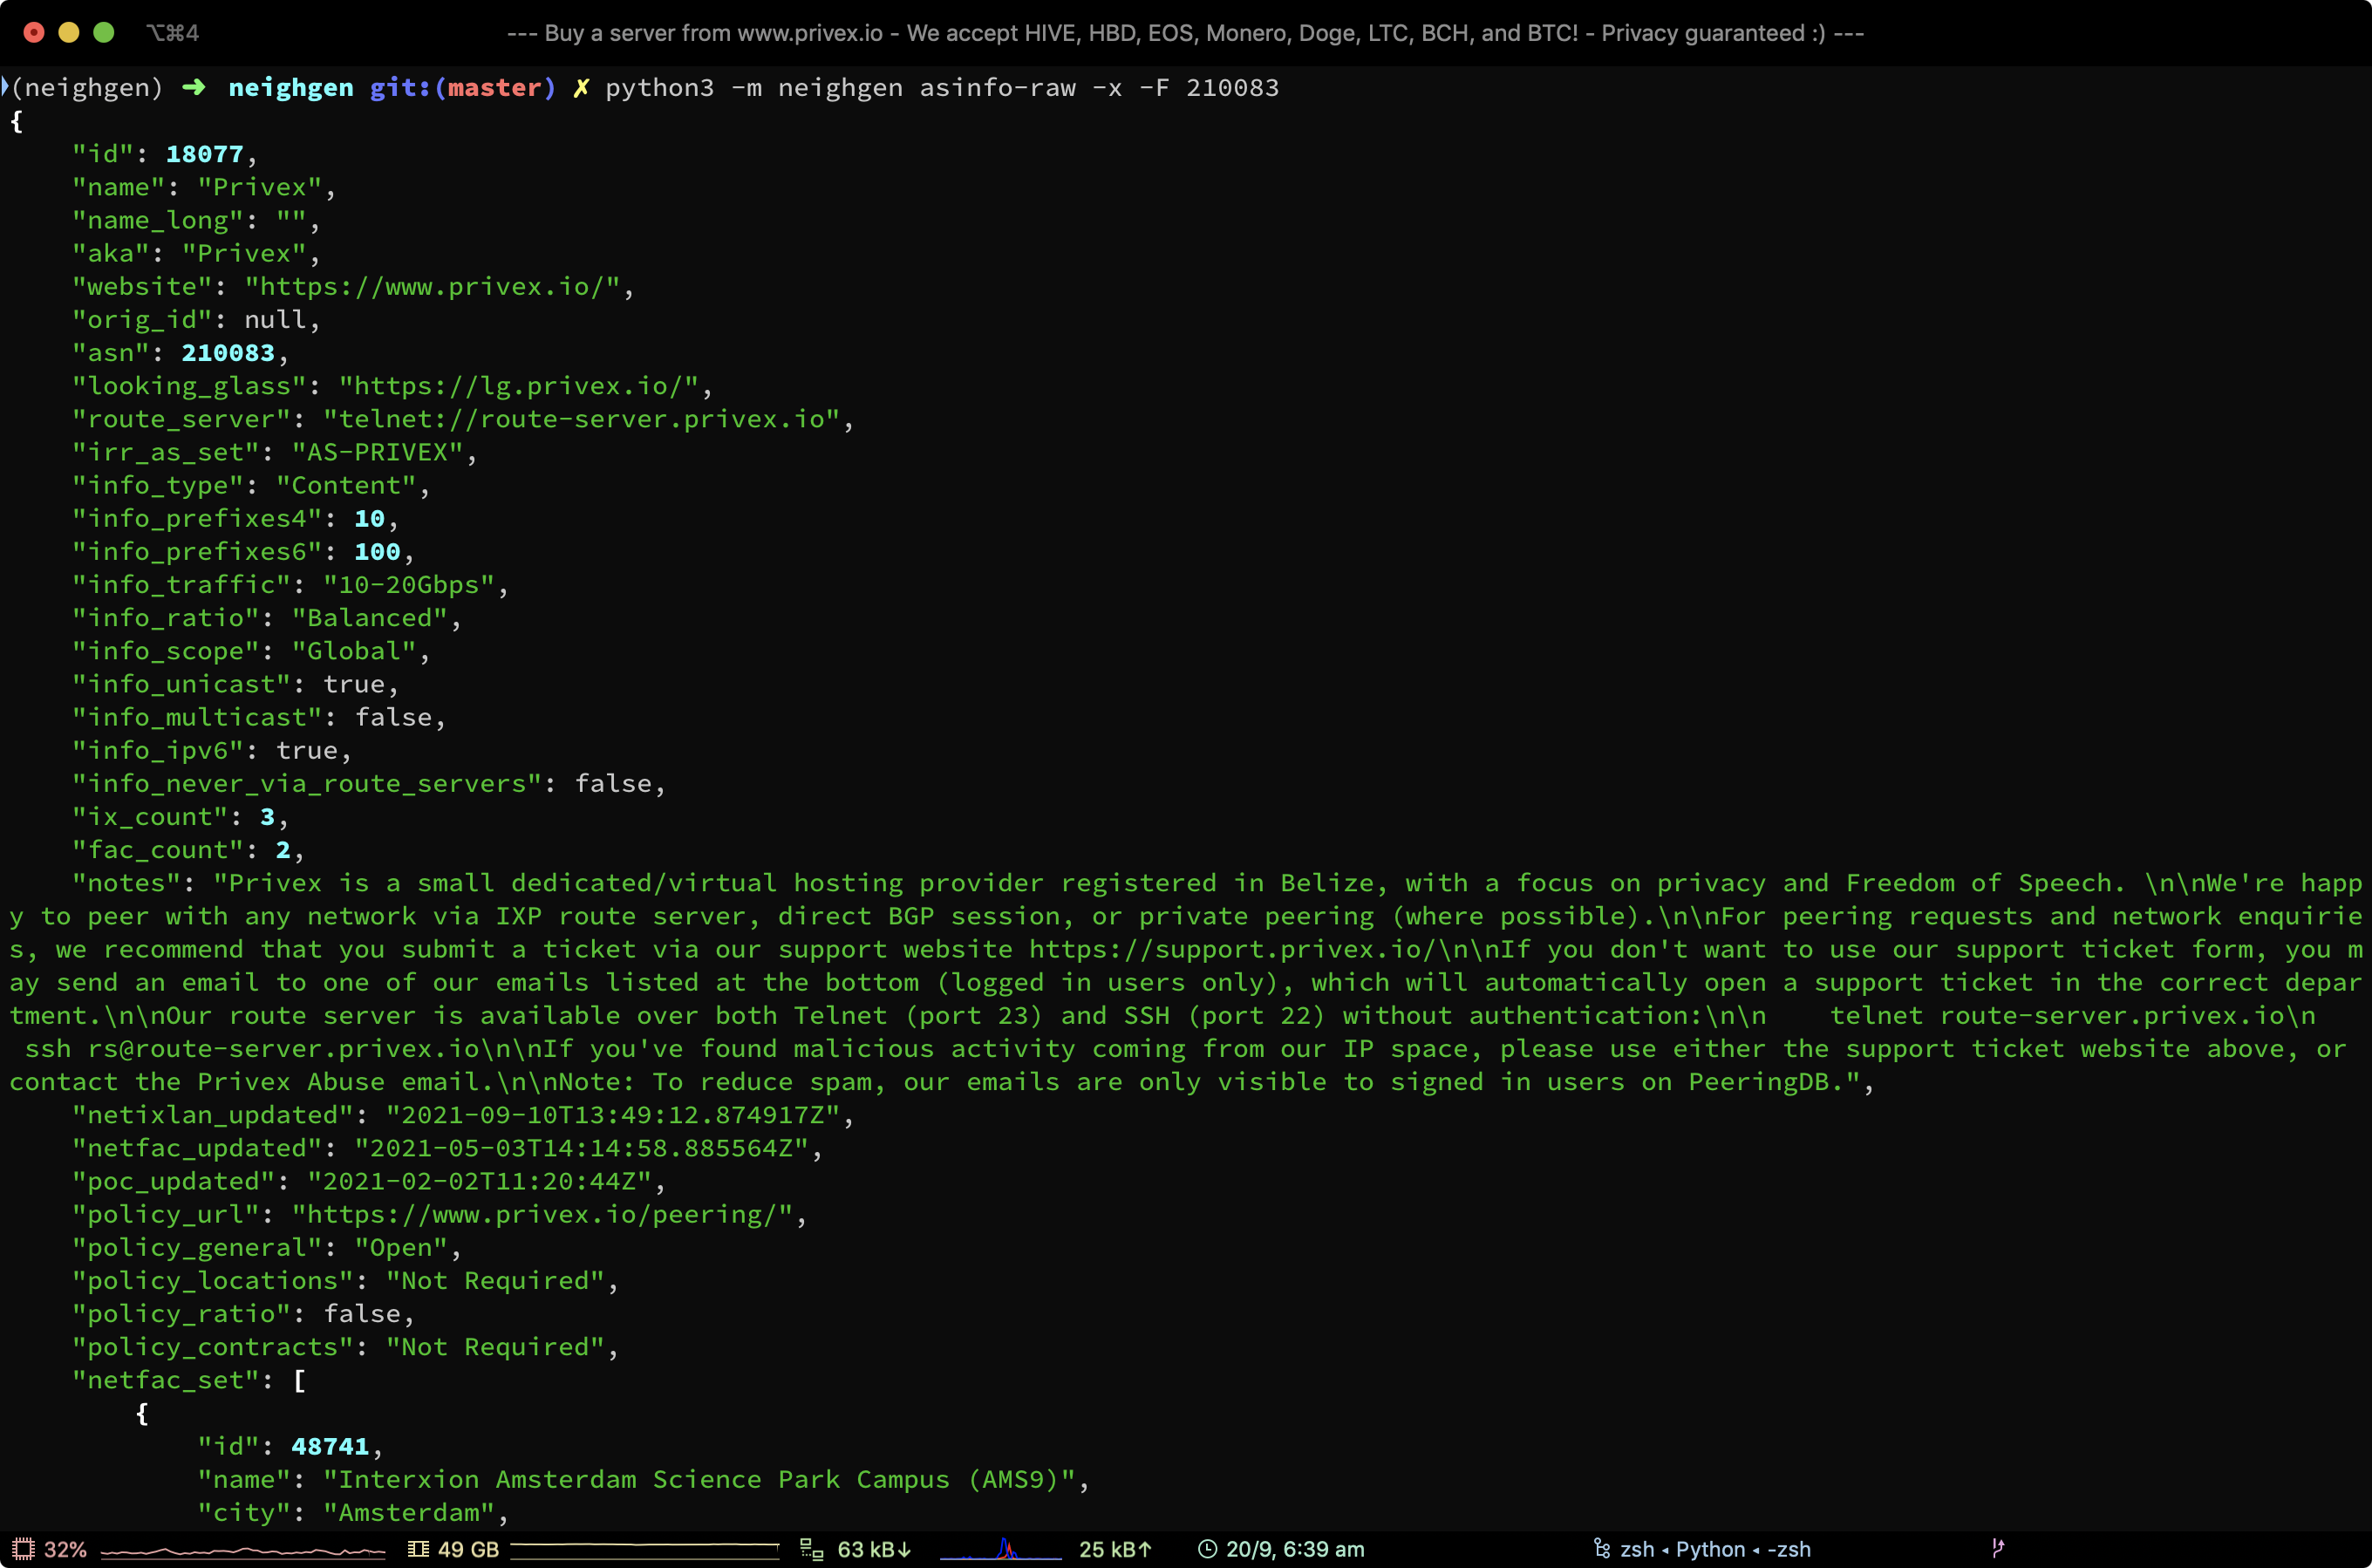 Screenshot of ASINFO-RAW command showing outputted JSON